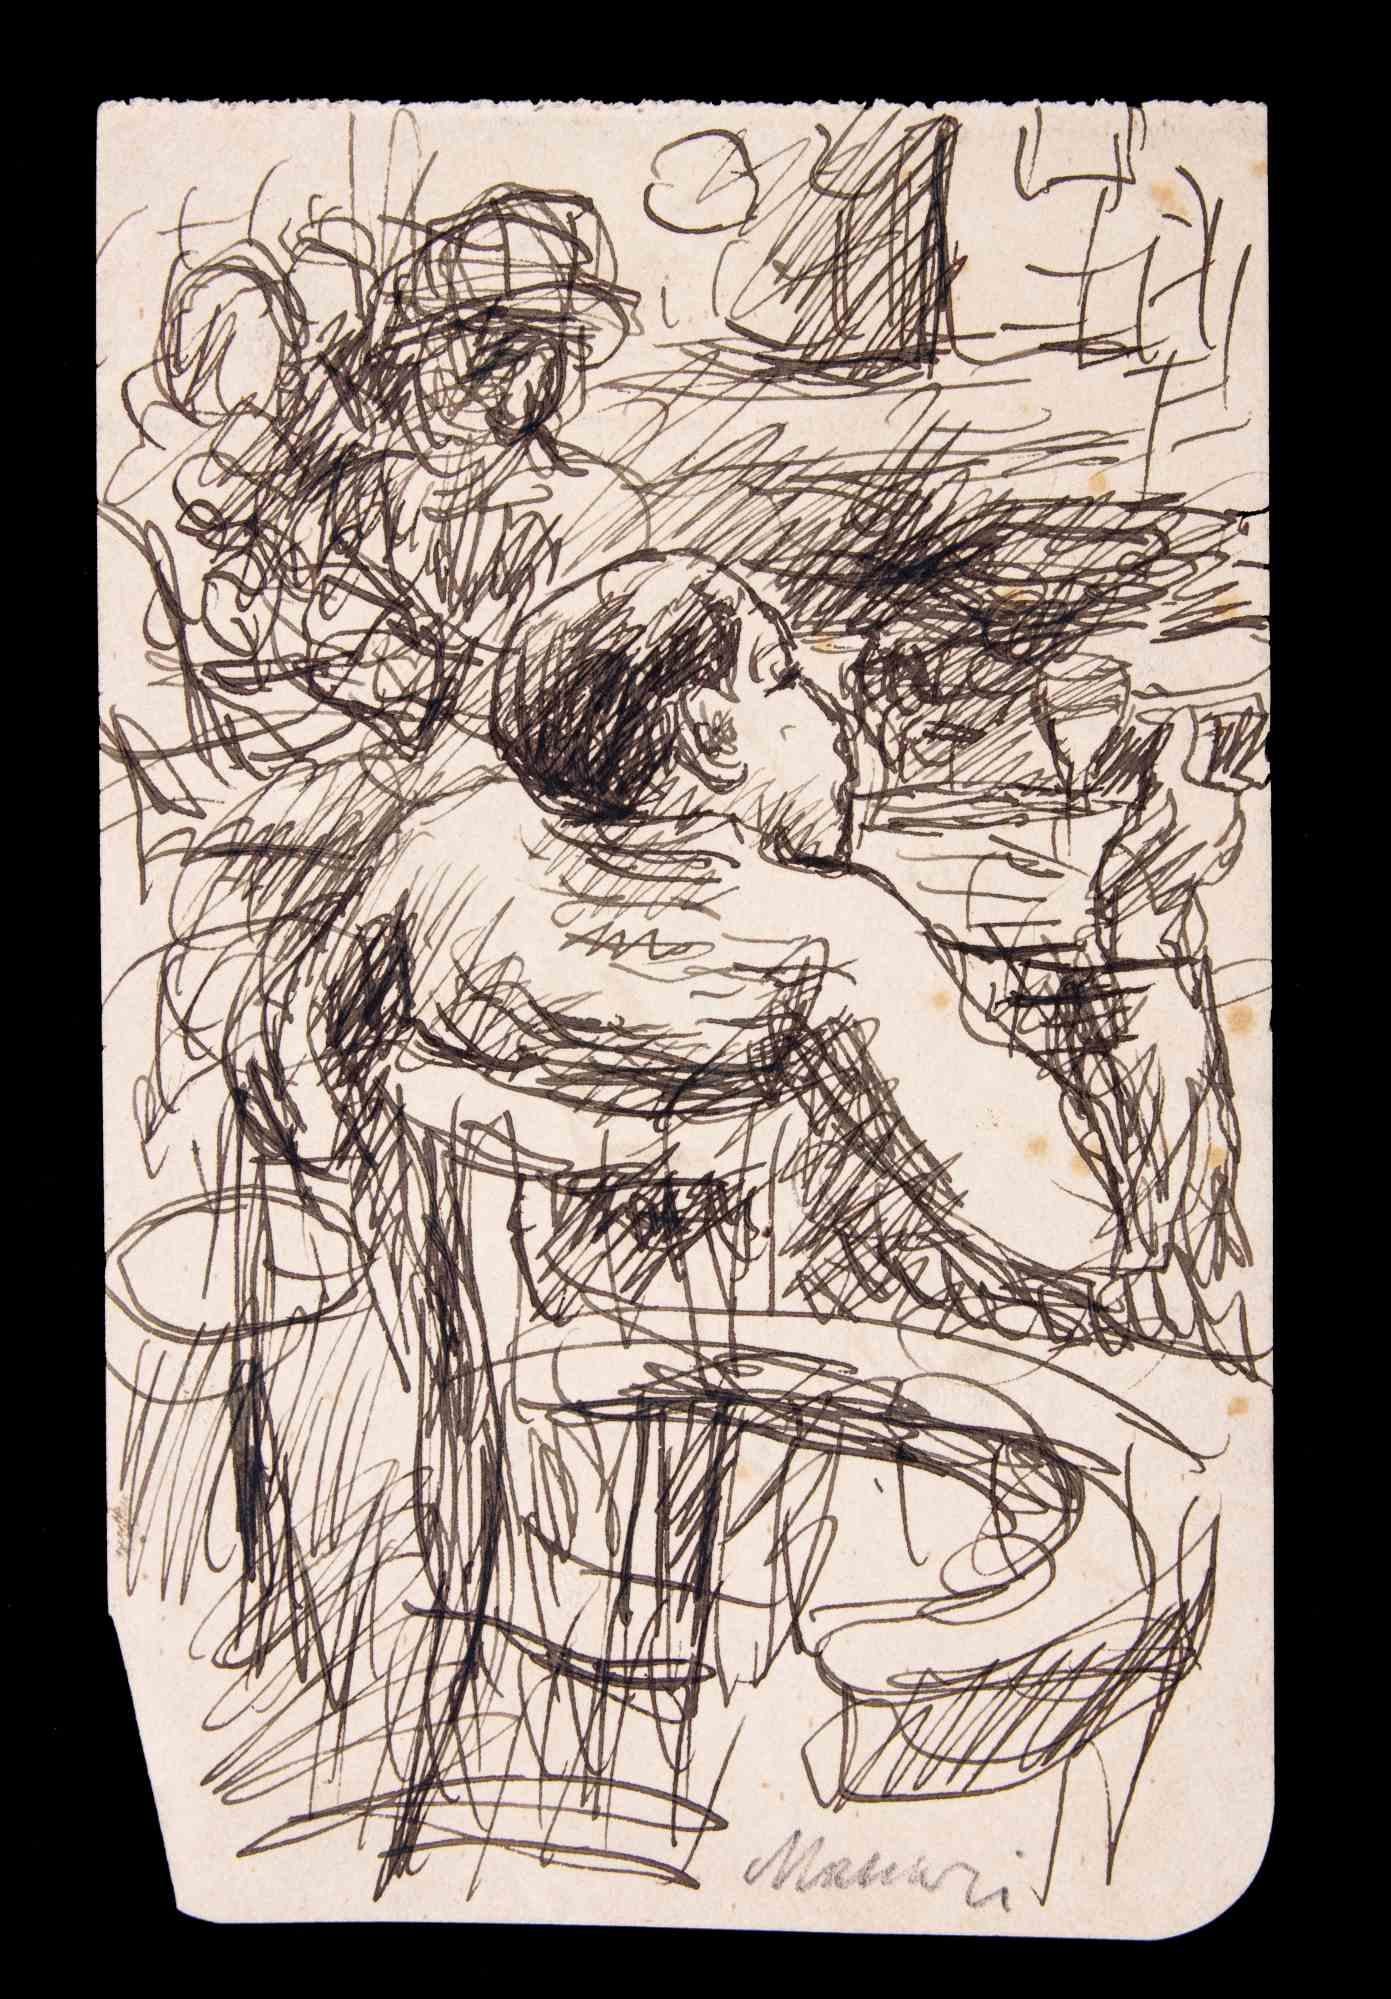 At the Cafe is a Pen Drawing realized by Mino Maccari  (1924-1989) in 1940s.

Hand-signed on the lower margin.

Good condition on a little paper, another sketch on the back.

Mino Maccari (Siena, 1924-Rome, June 16, 1989) was an Italian writer,